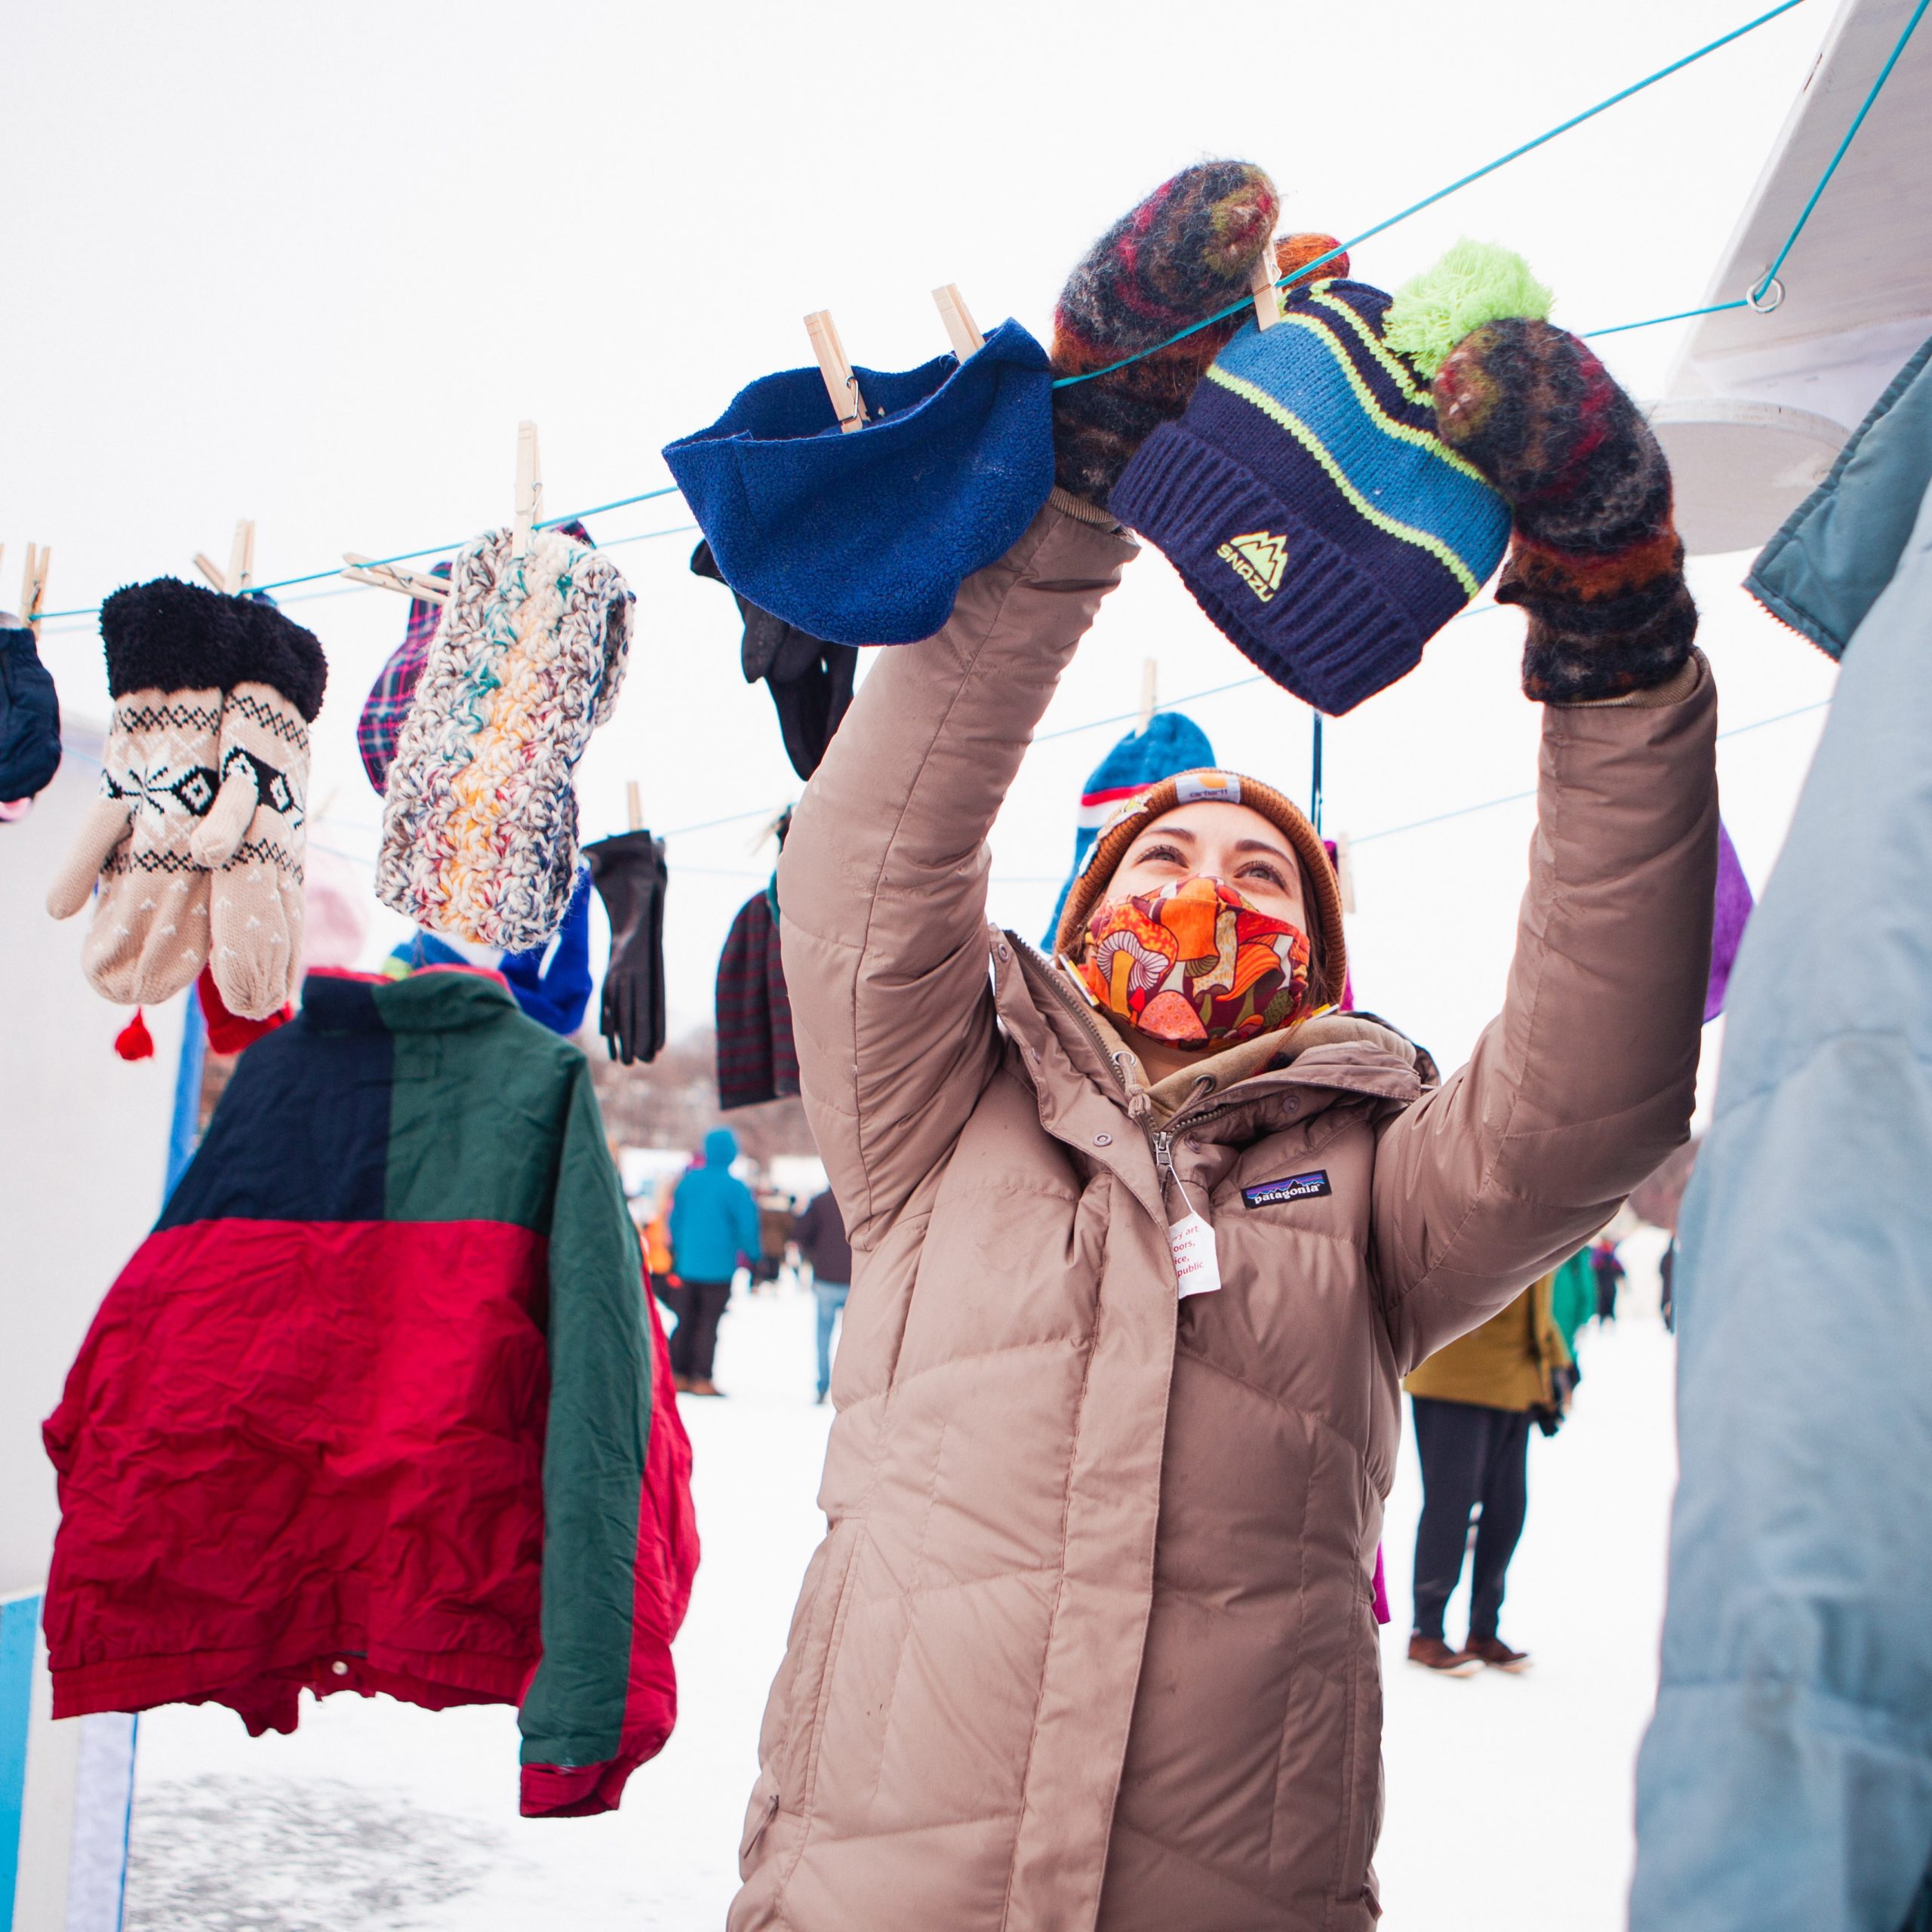 A bundled up person hangs a hat on a clothesline full of winterwear outside.